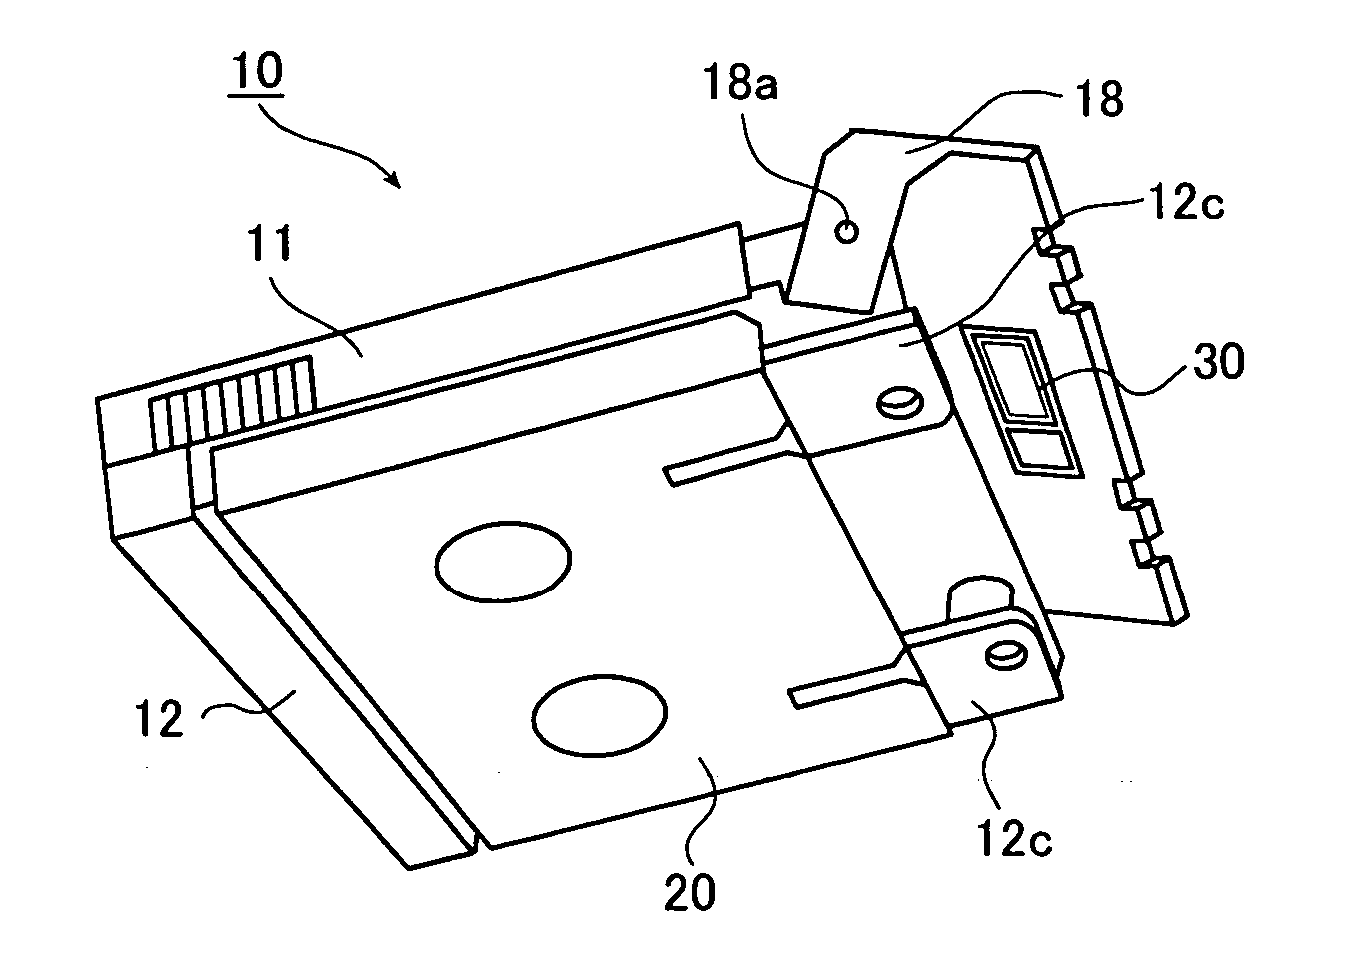 Recording medium cartridge having an accommodation portion for a noncontact-type memory